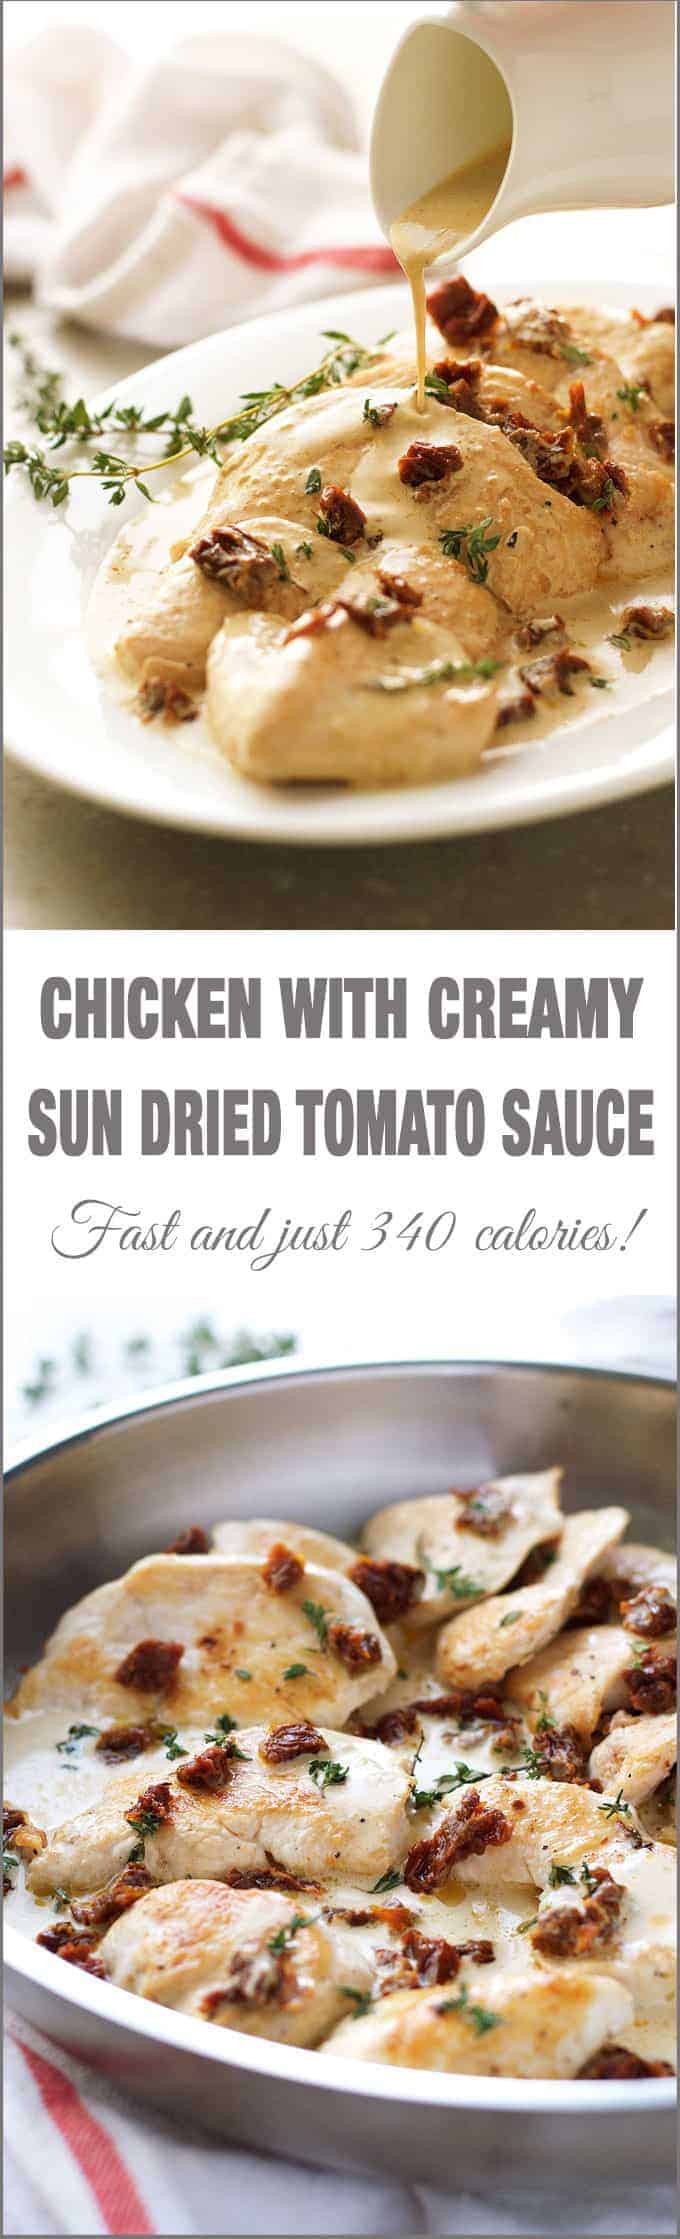 Chicken with Creamy Sun Dried Tomato Sauce - super easy and fast to make with a sauce so incredible you